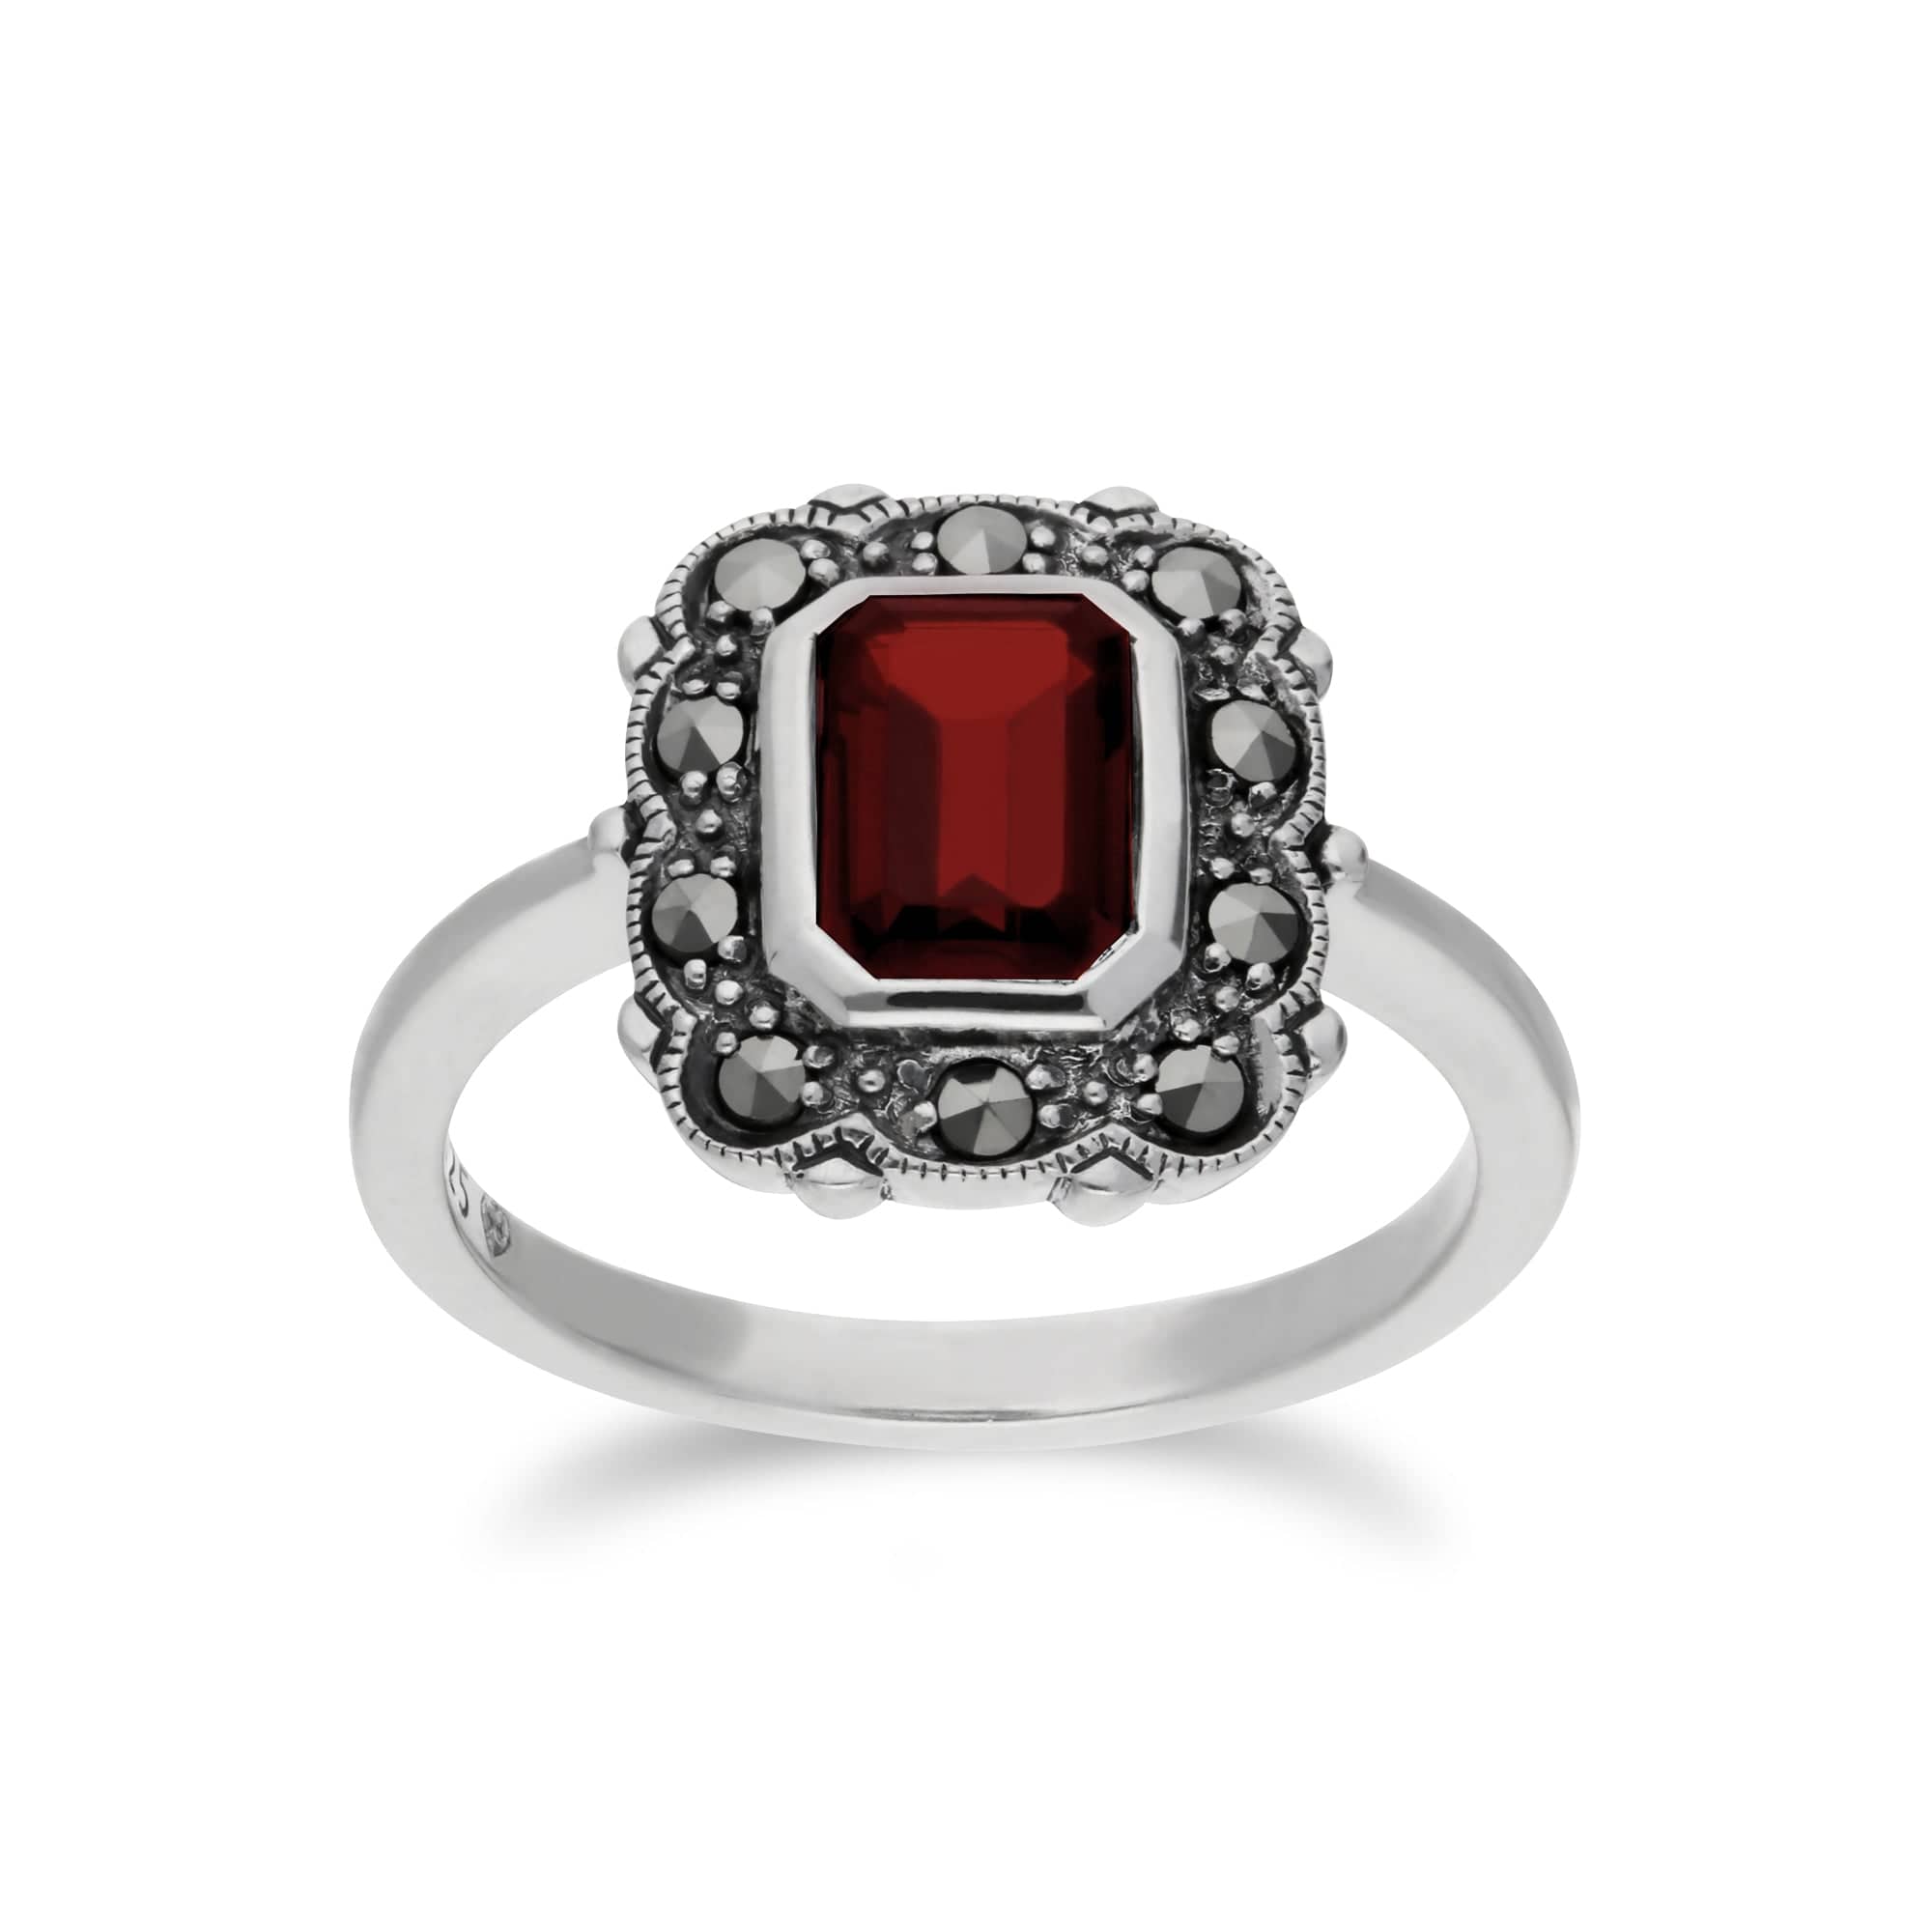 214R597107925 Art Nouveau Style Octagon Garnet & Marcasite Border Ring in 925 Sterling Silver 1